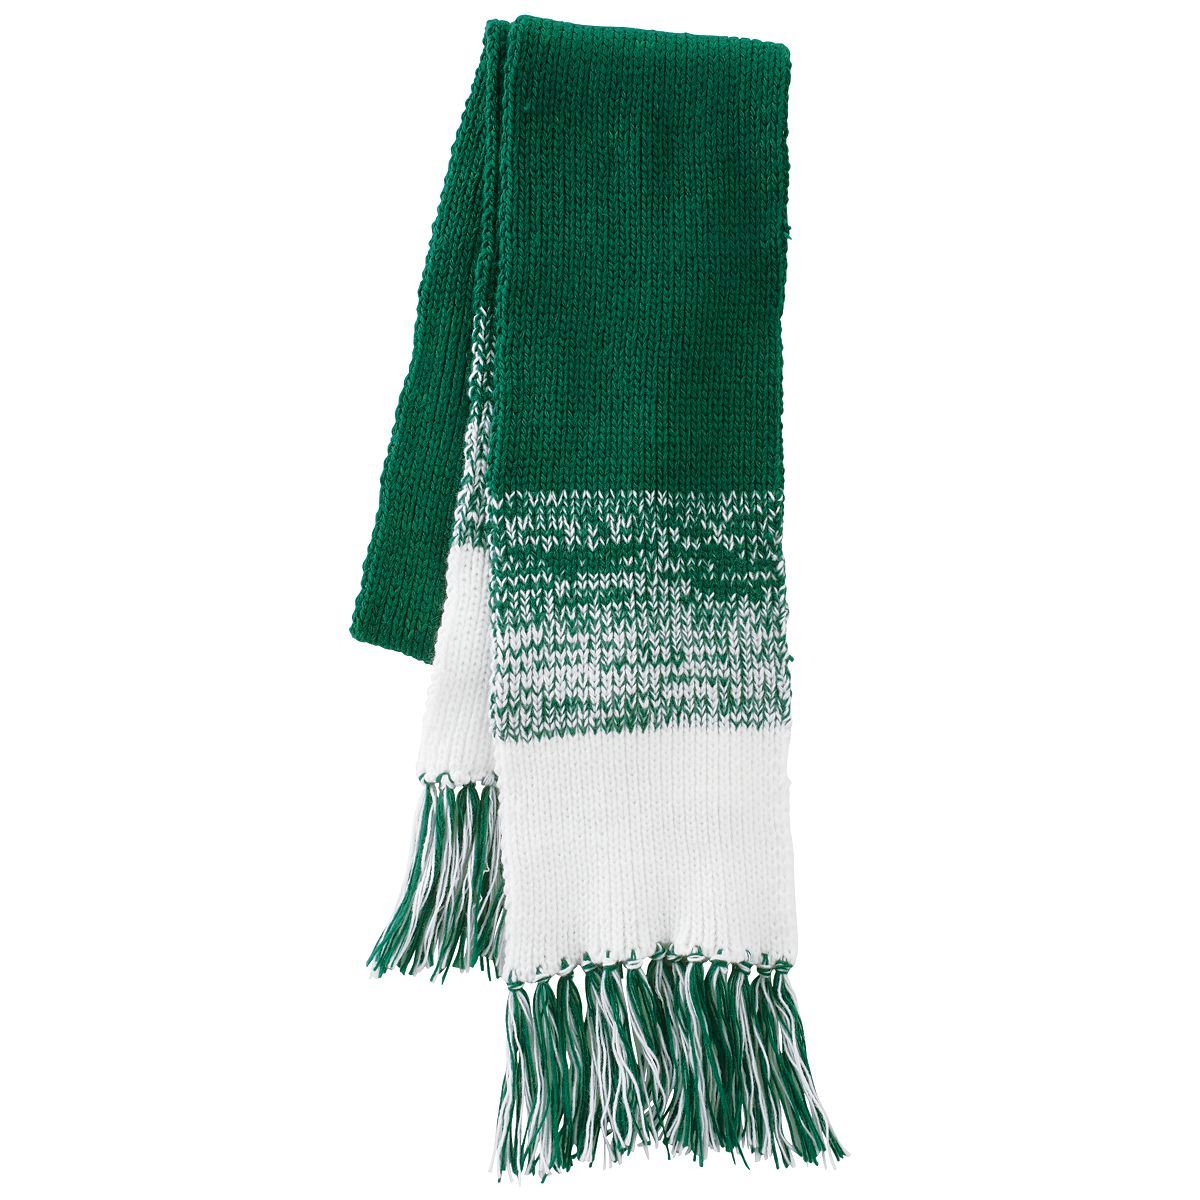 HOLLOWAY - ASCENT SCARF